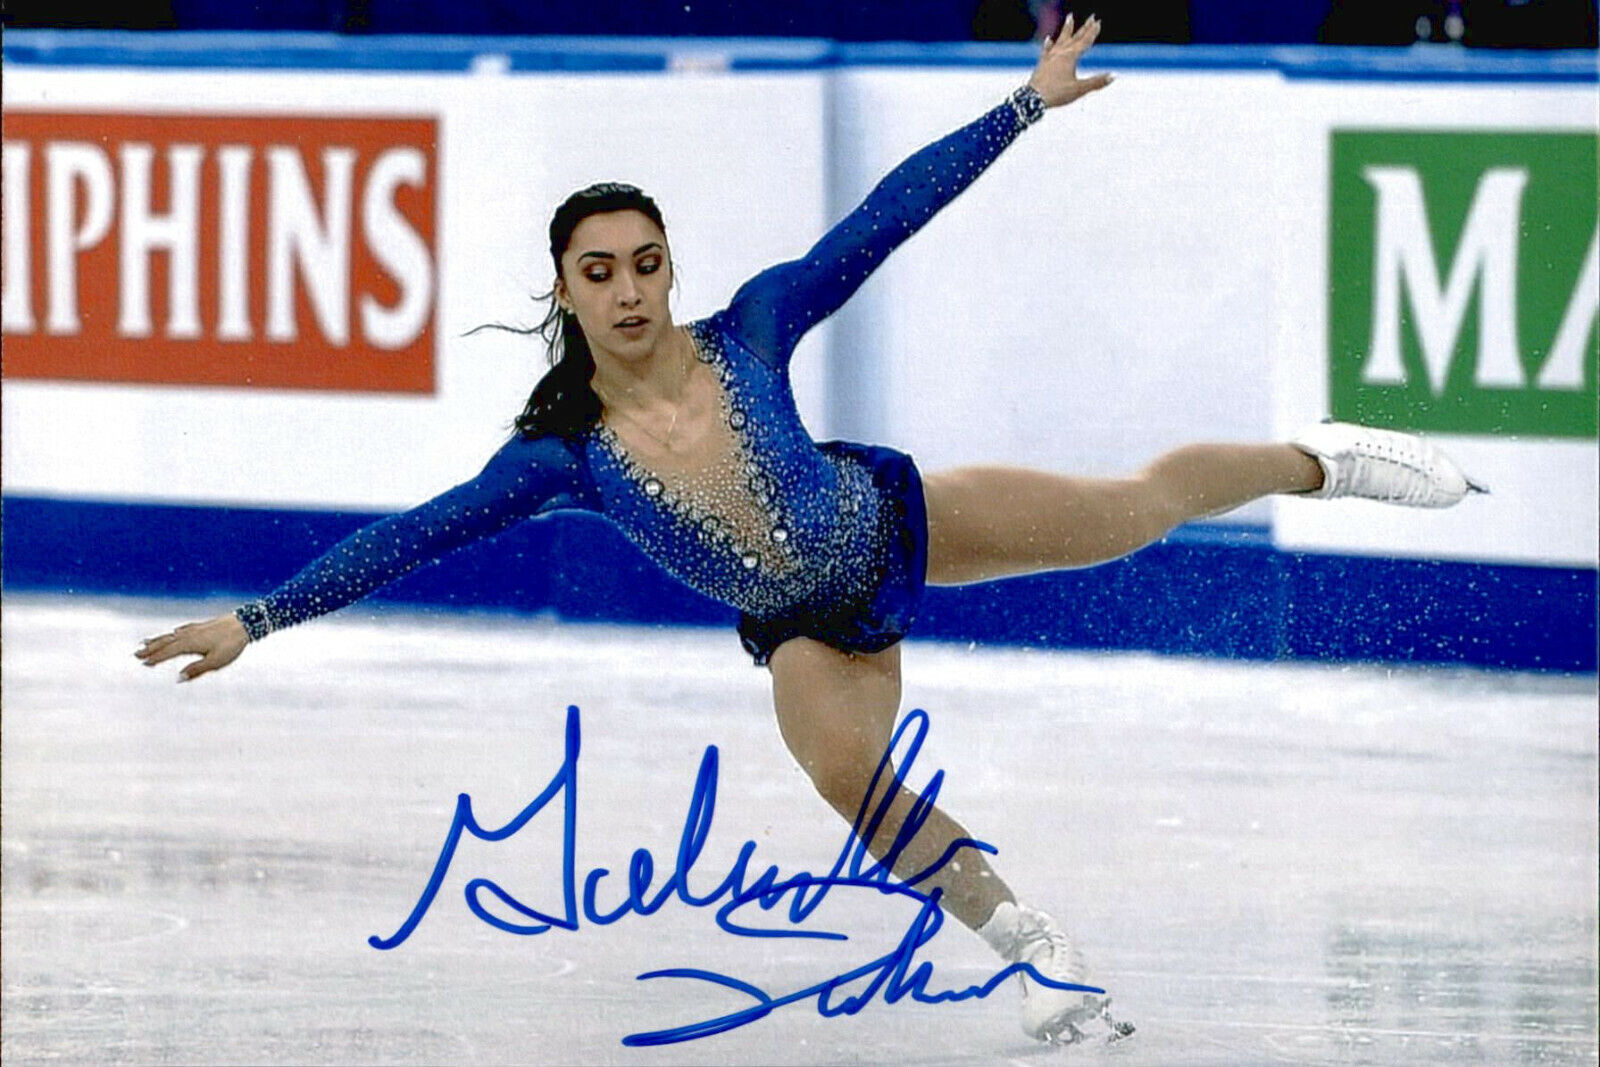 Gabrielle Daleman SIGNED 4x6 Photo Poster painting Figure Skating CANADIAN NATIONAL CHAMPION #8